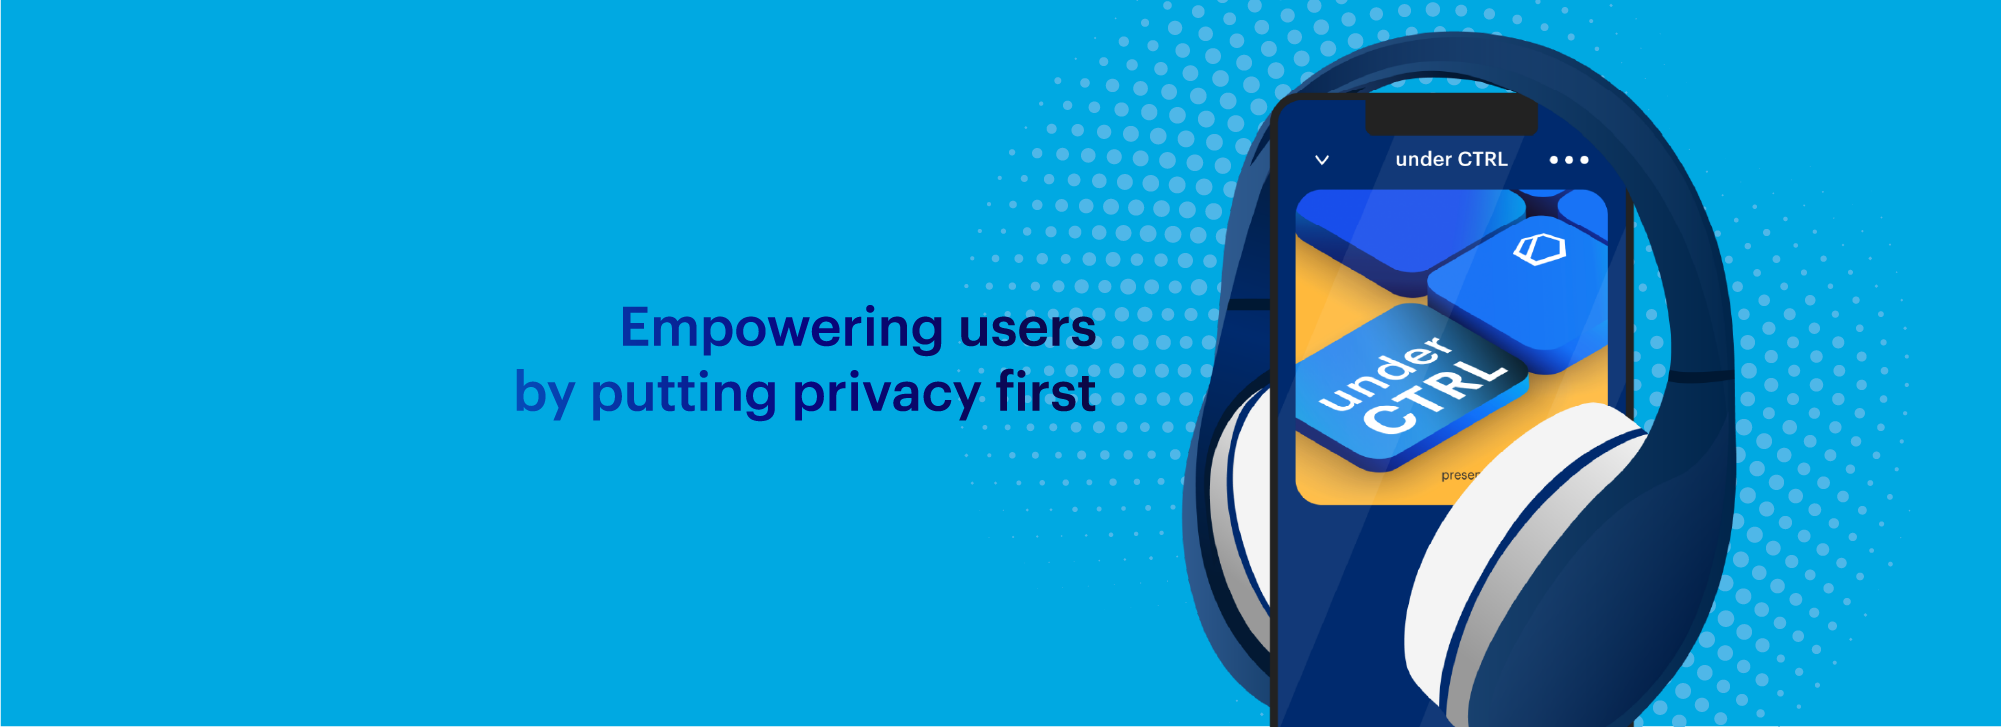 Empowering users by putting privacy first